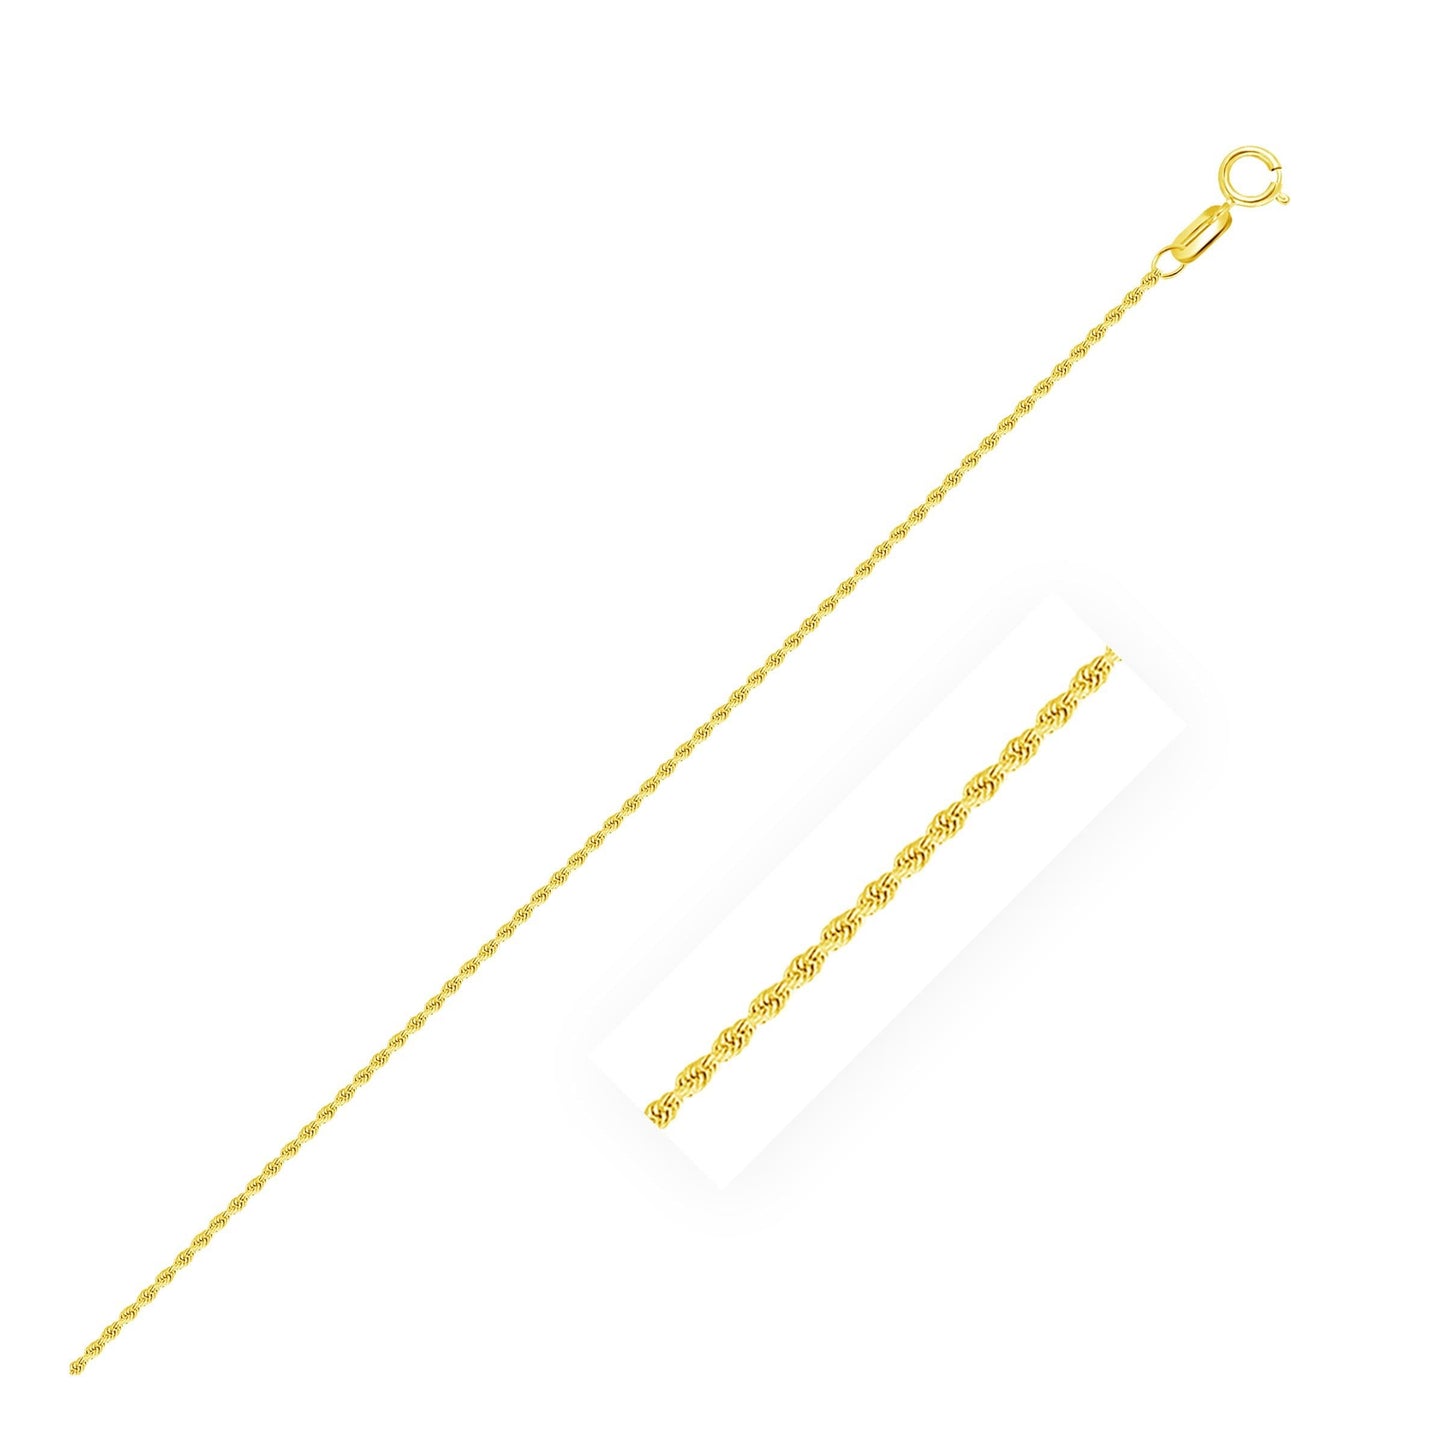 14k Yellow Gold Rope Chain in 1.25 mm